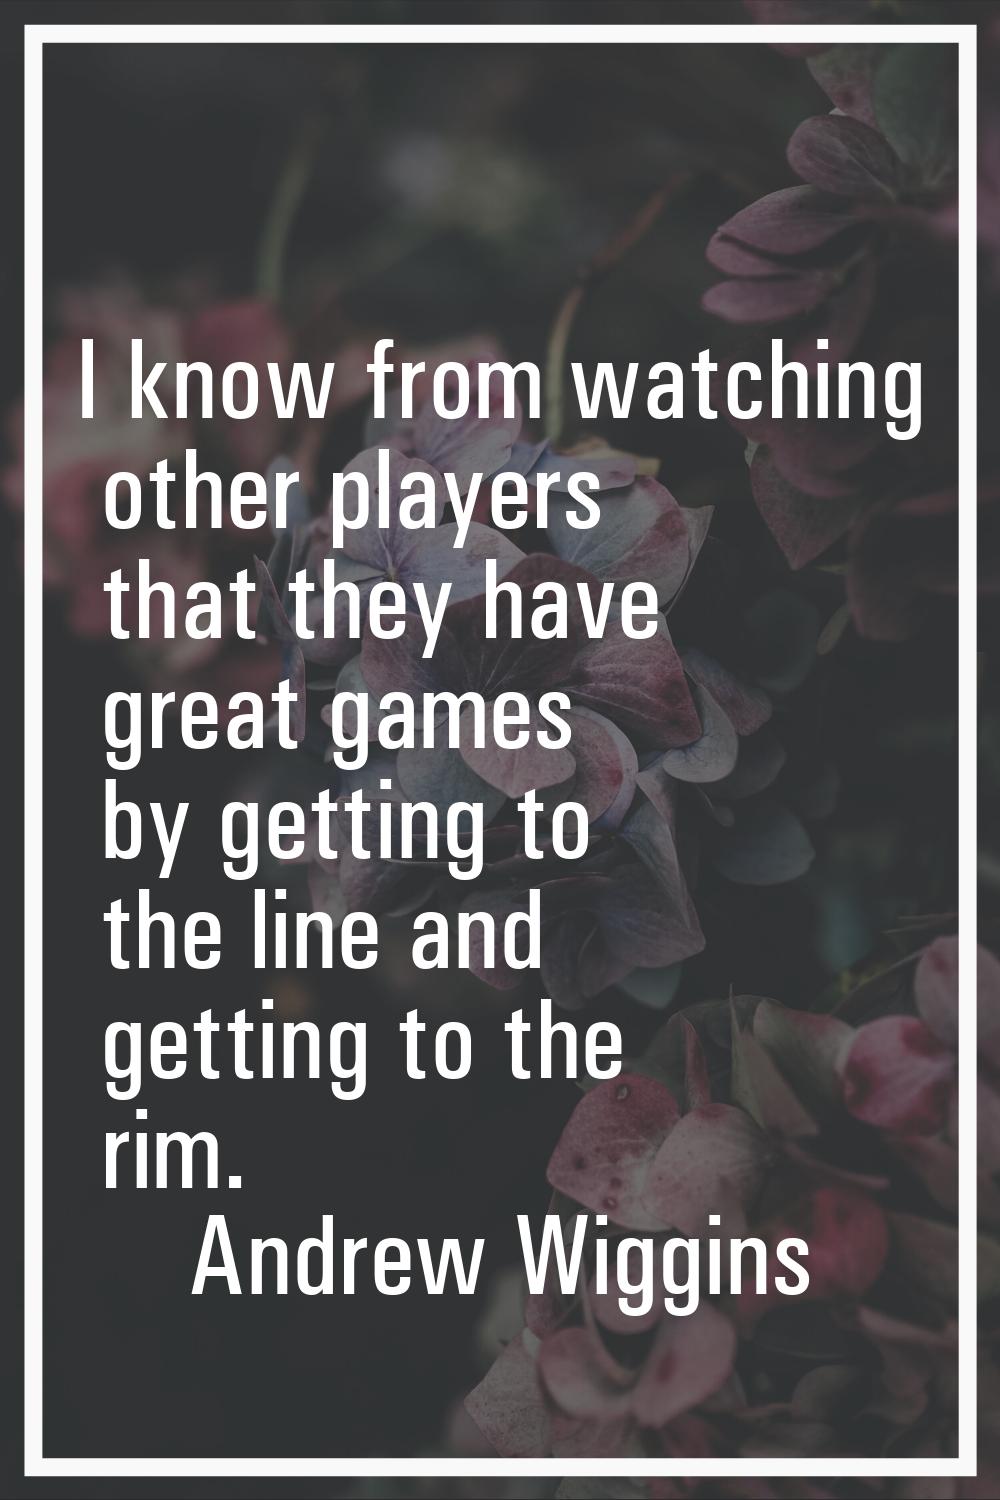 I know from watching other players that they have great games by getting to the line and getting to